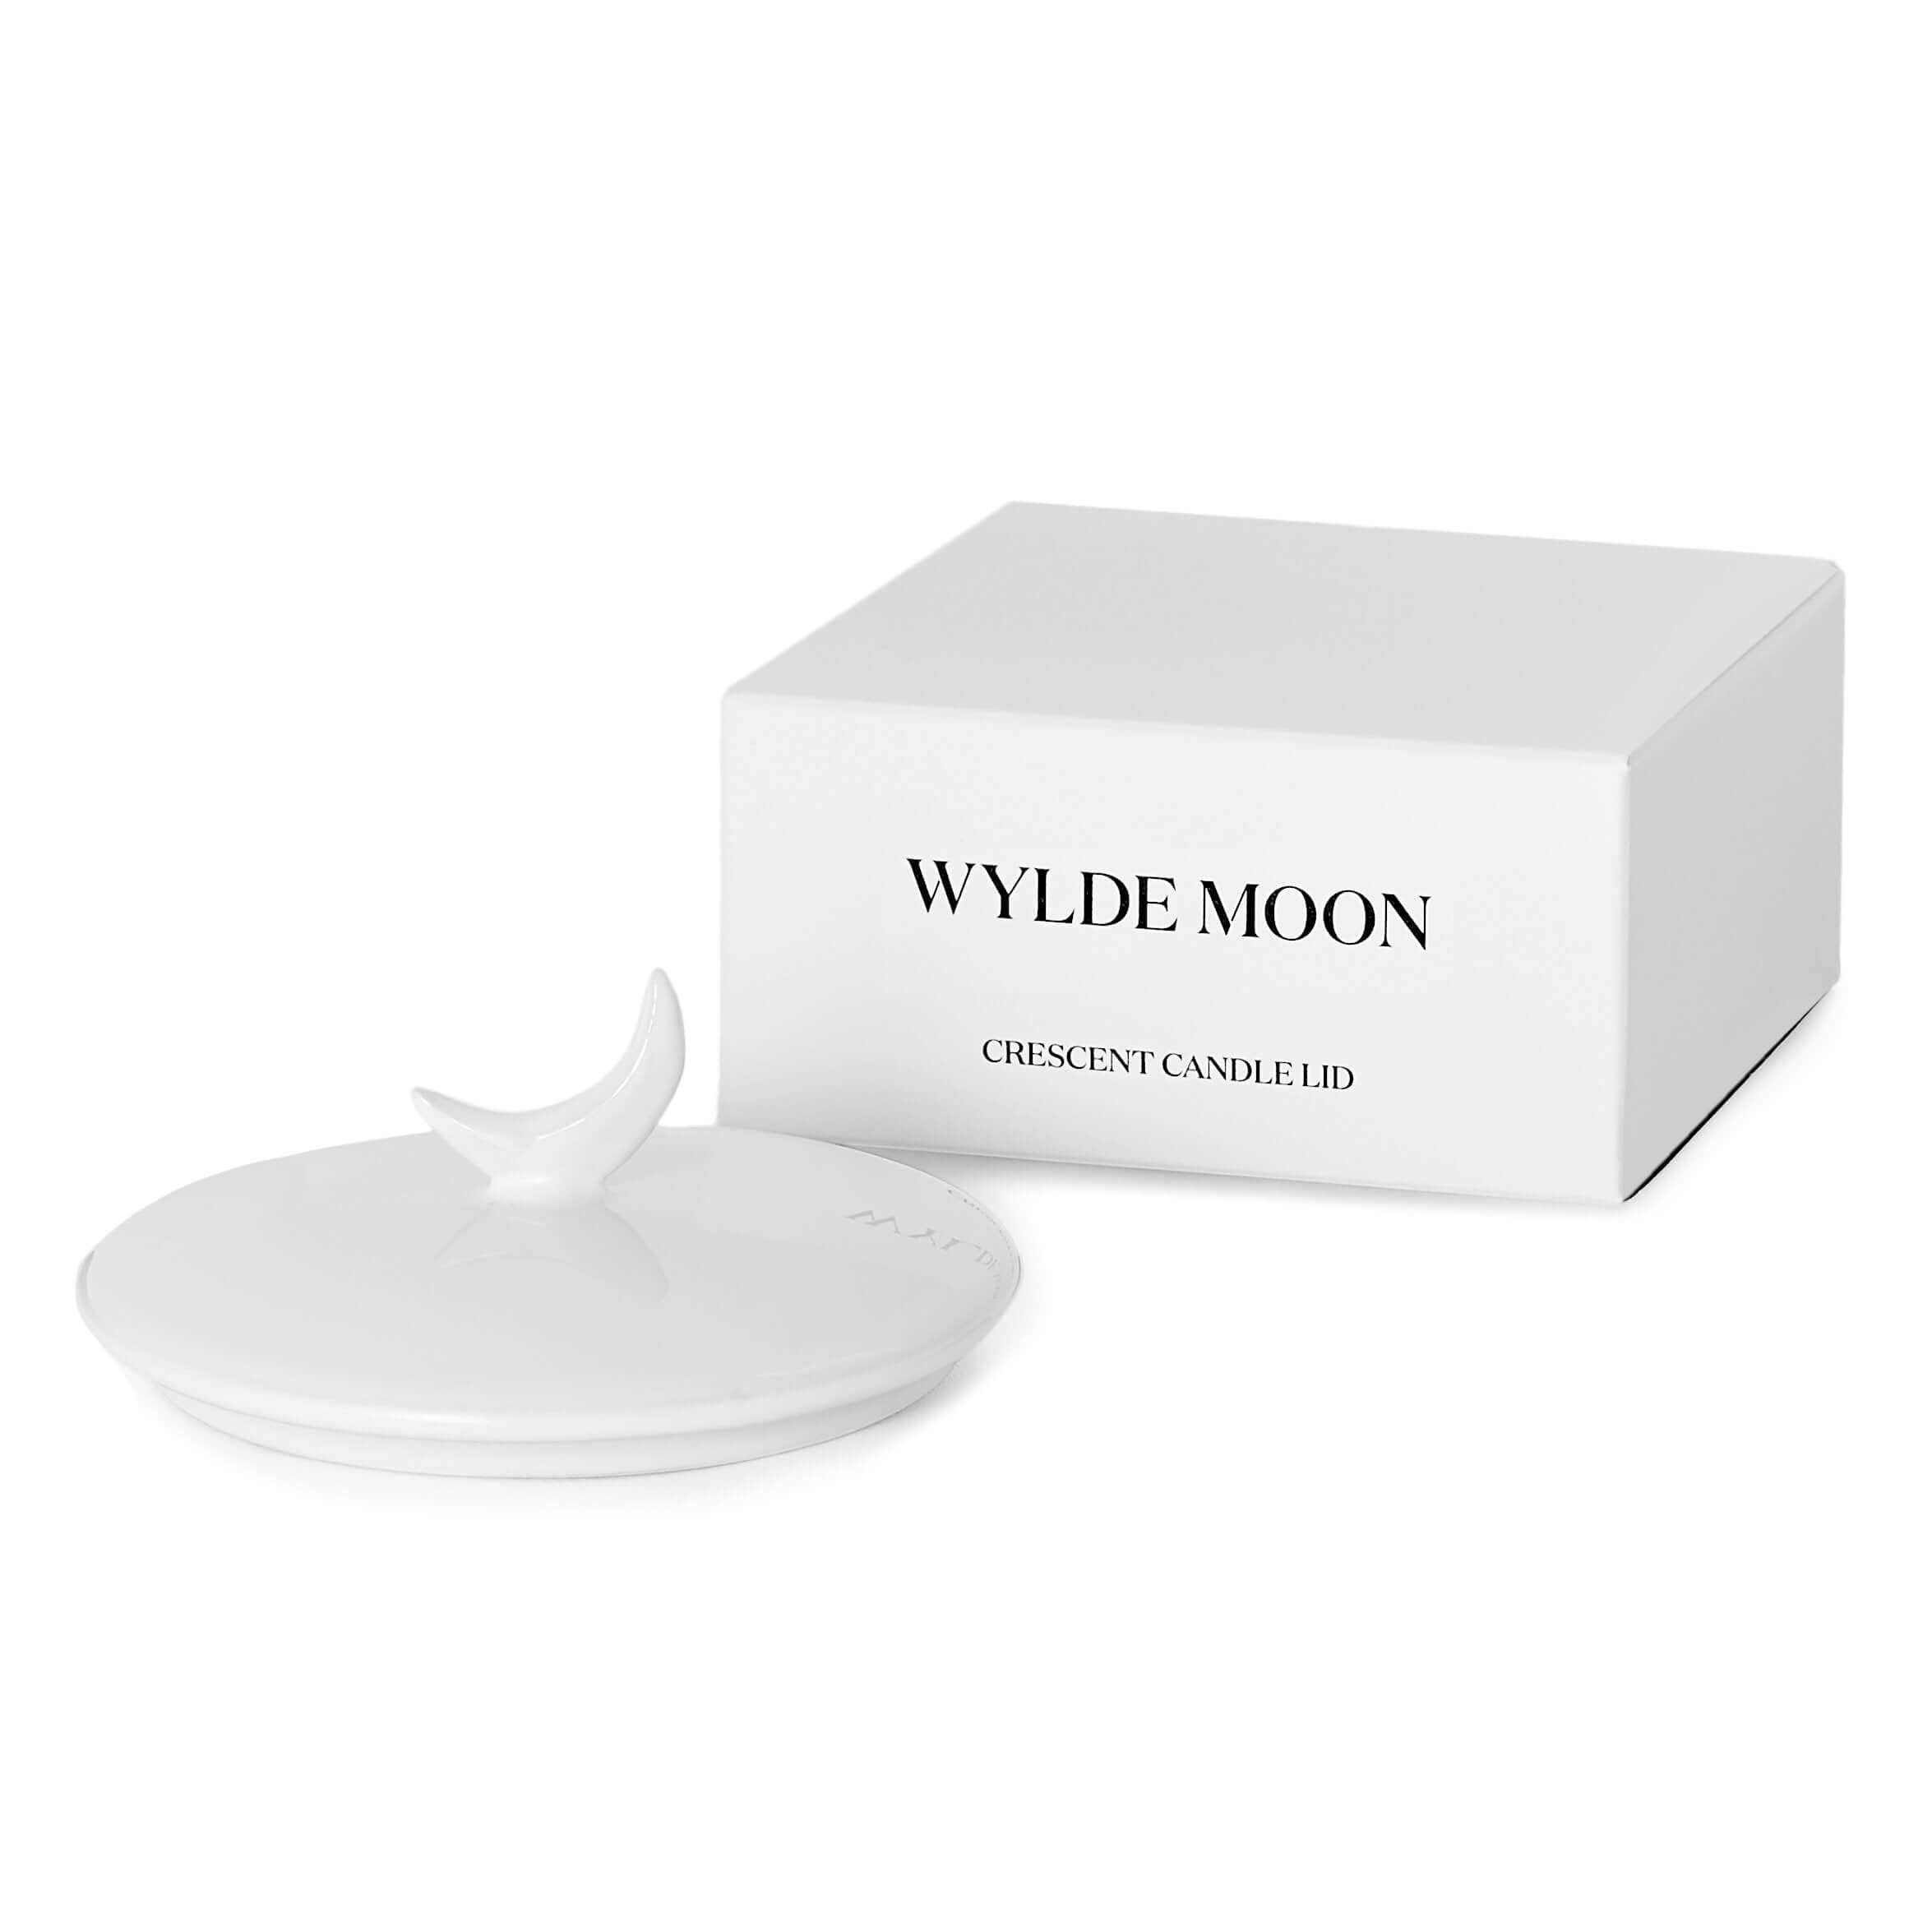 Single wick scented candle: ceramic lid